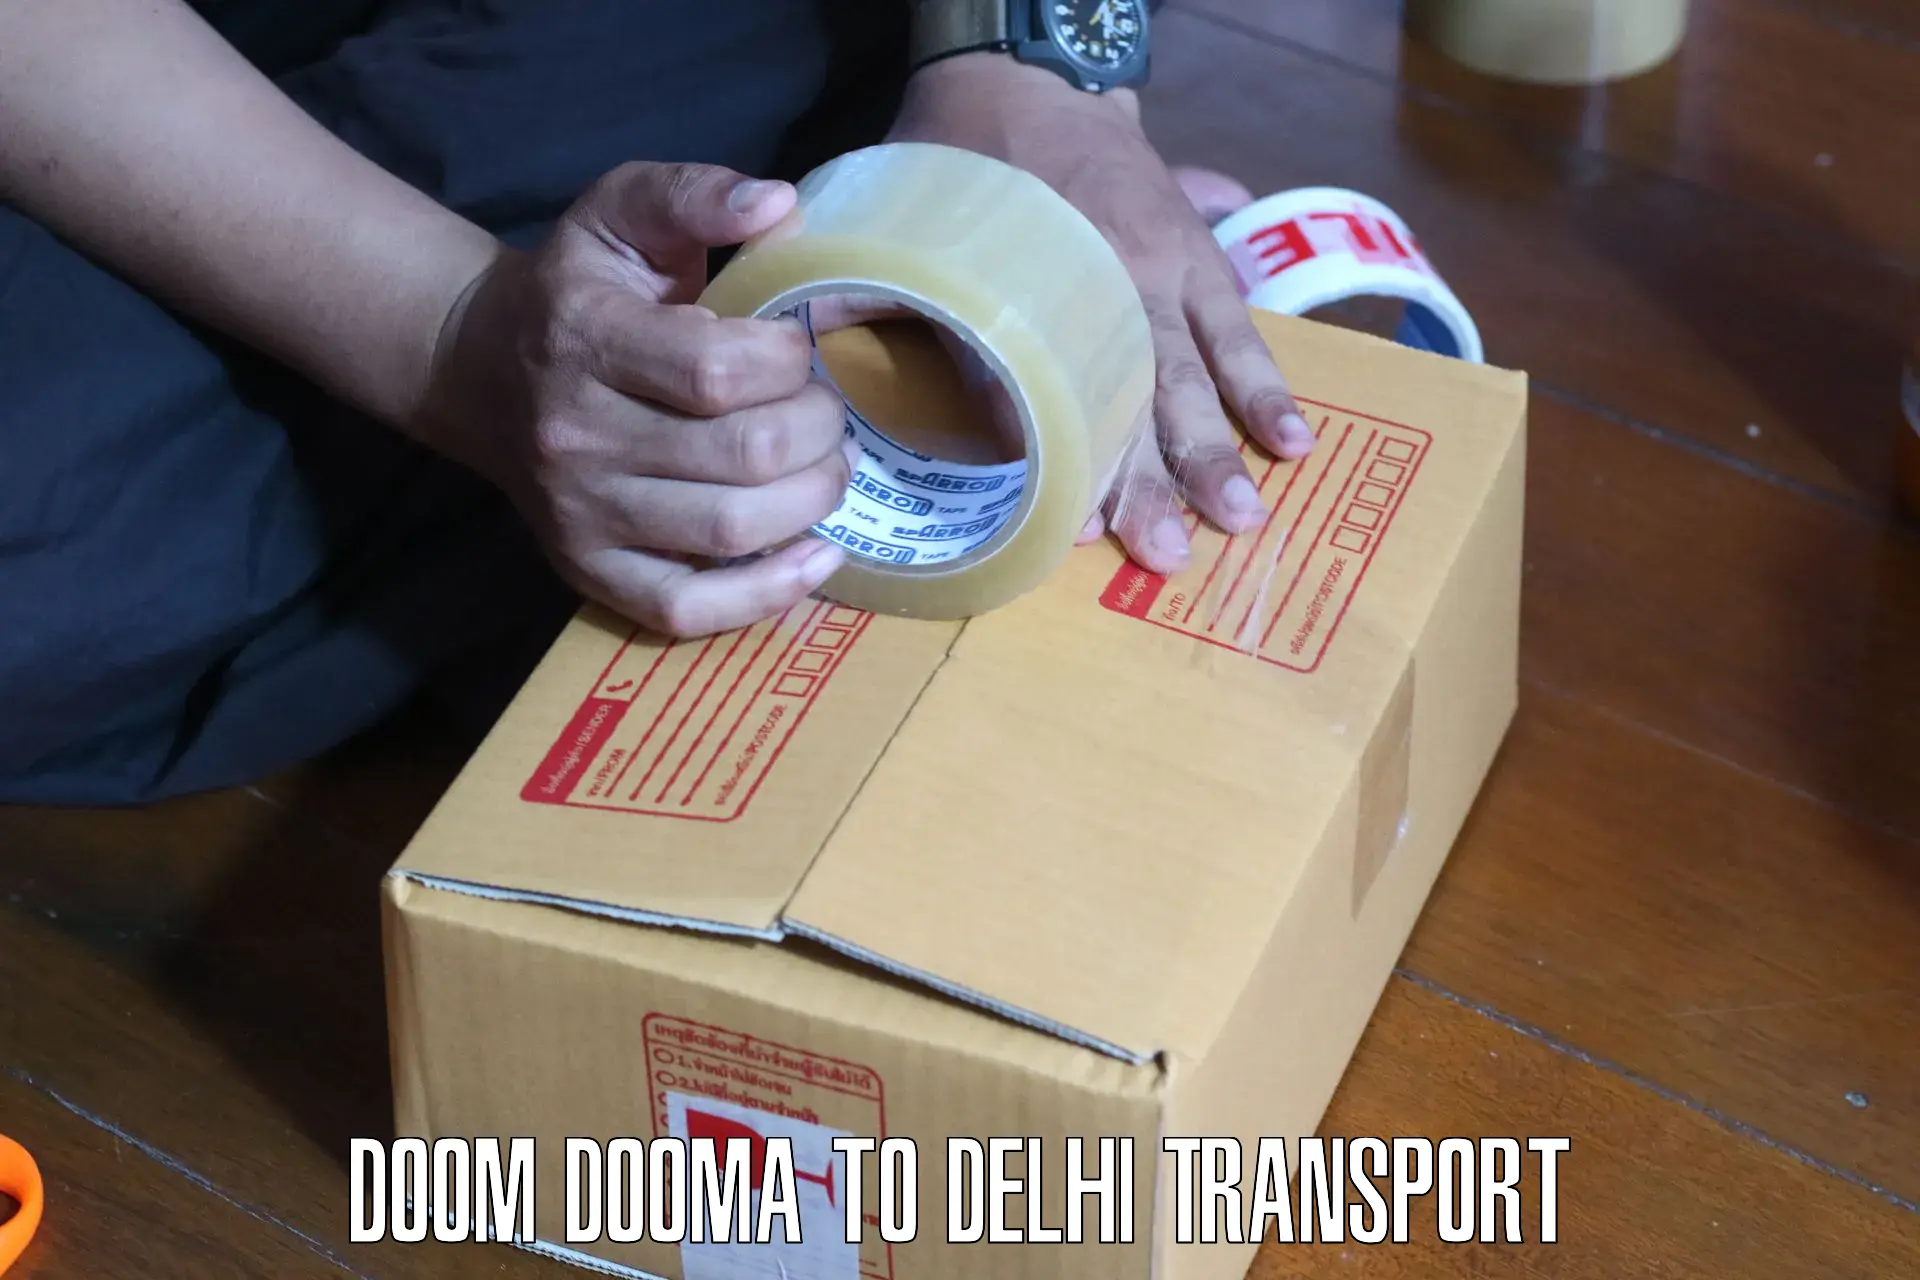 Air freight transport services Doom Dooma to East Delhi